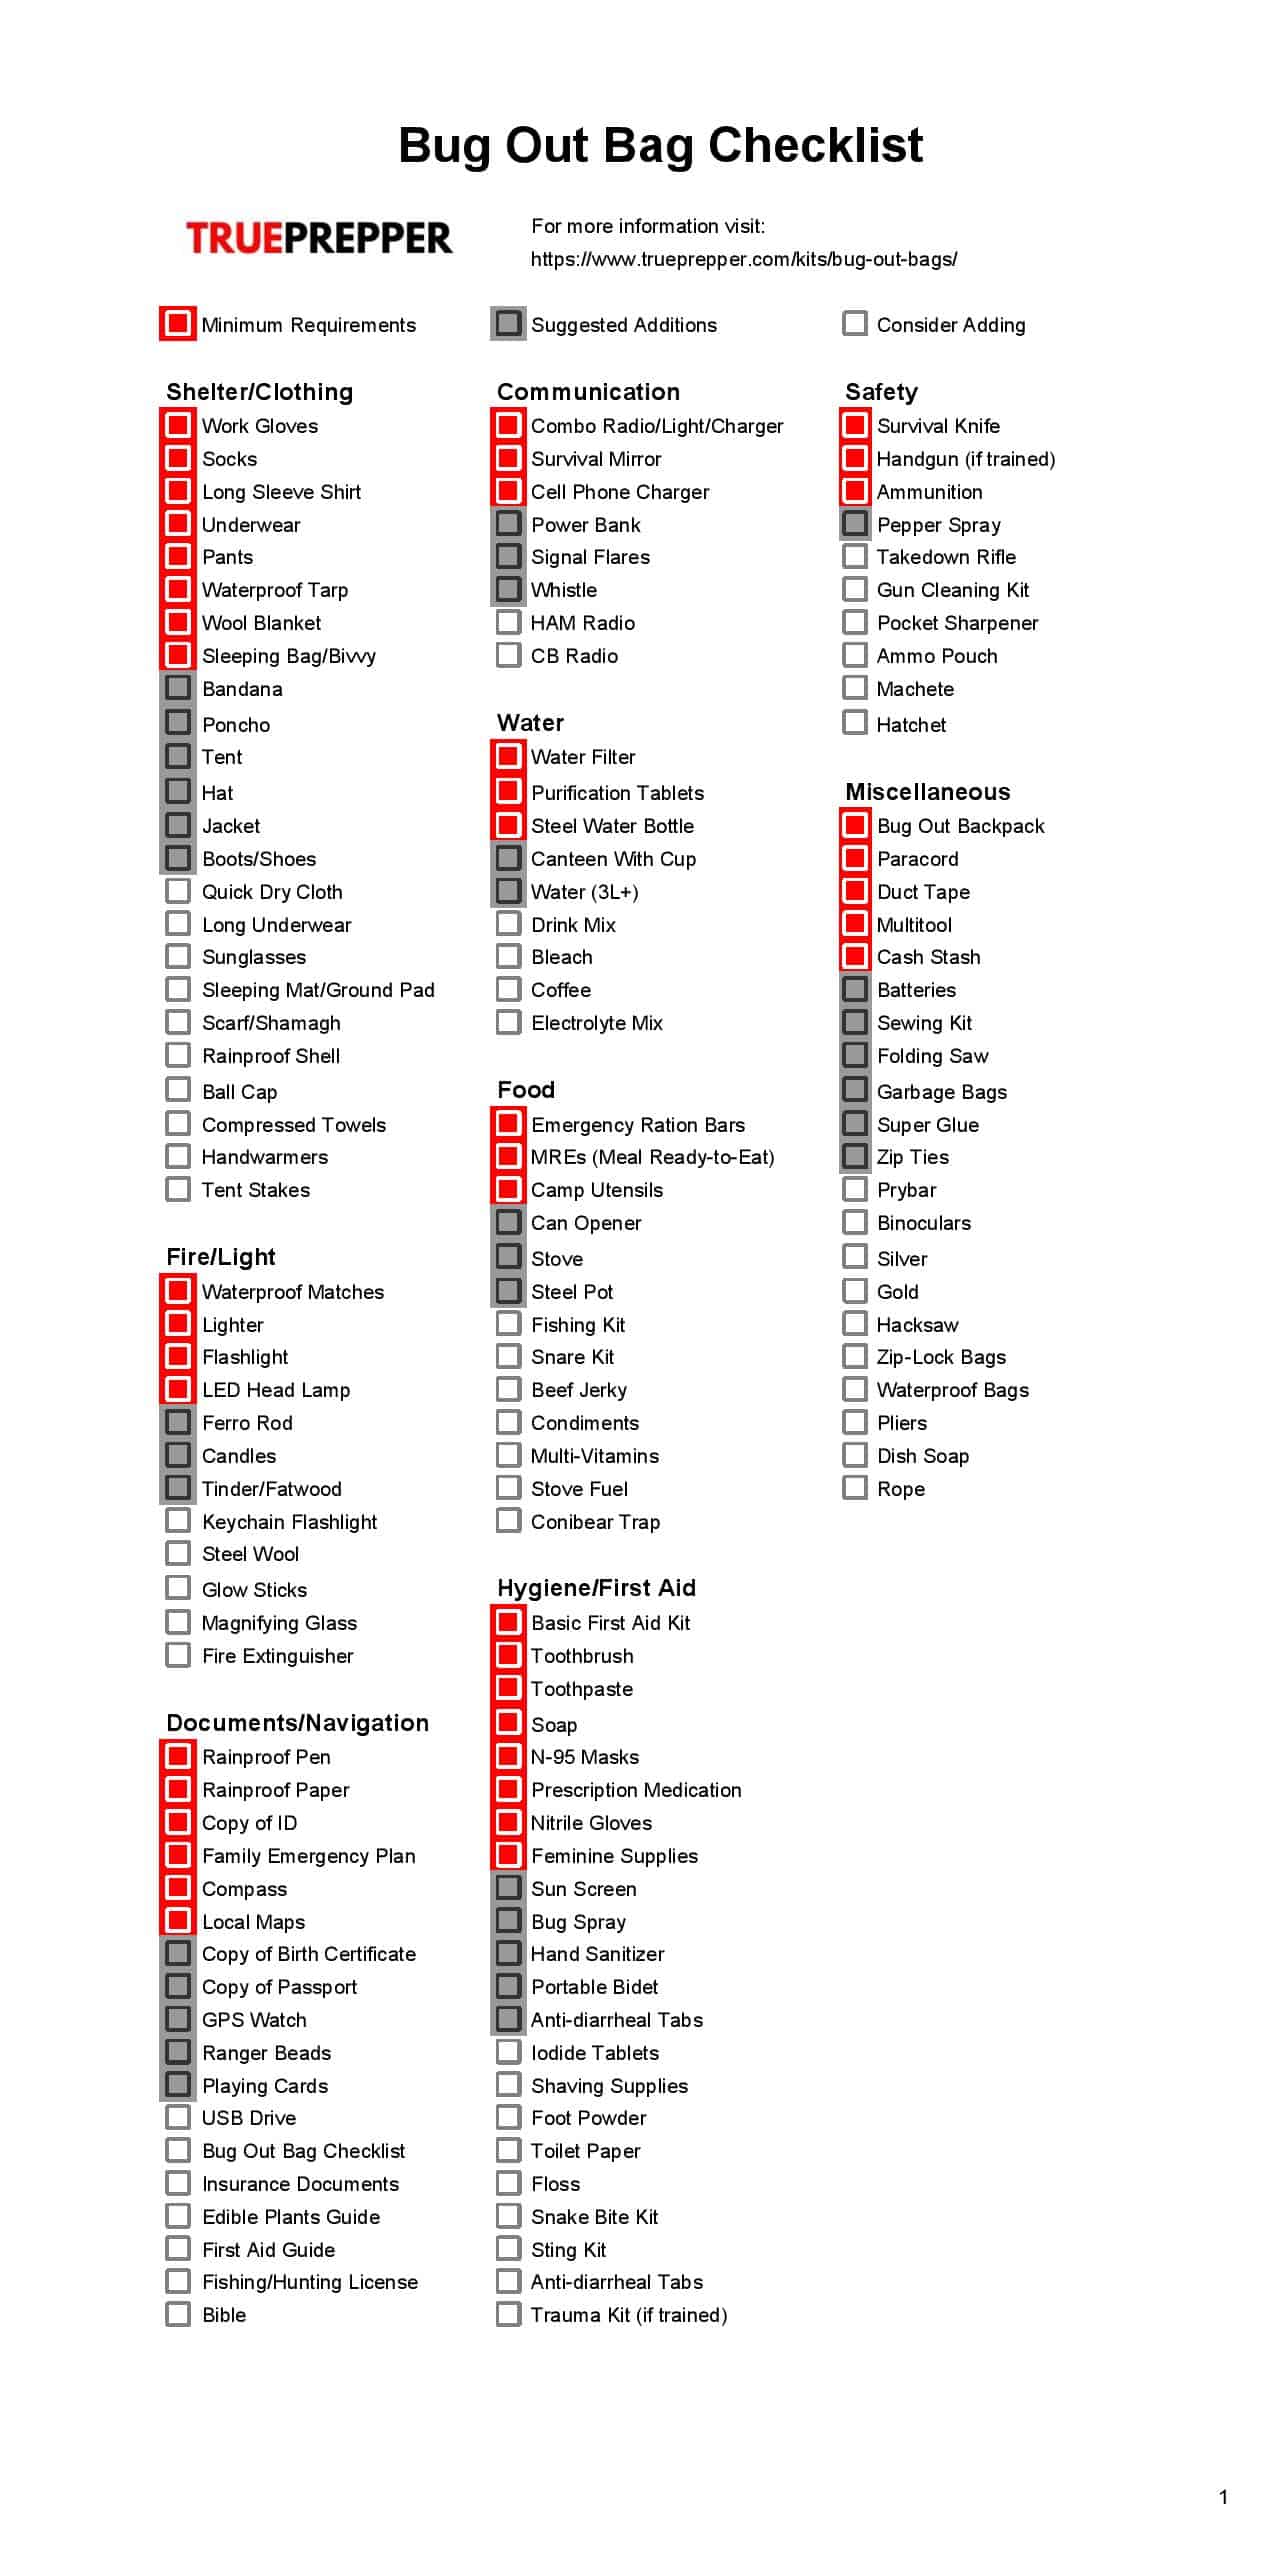 Bug-Out Bag Checklist 2022 - 75+ Essentials for the Ultimate Bug-Out Bag